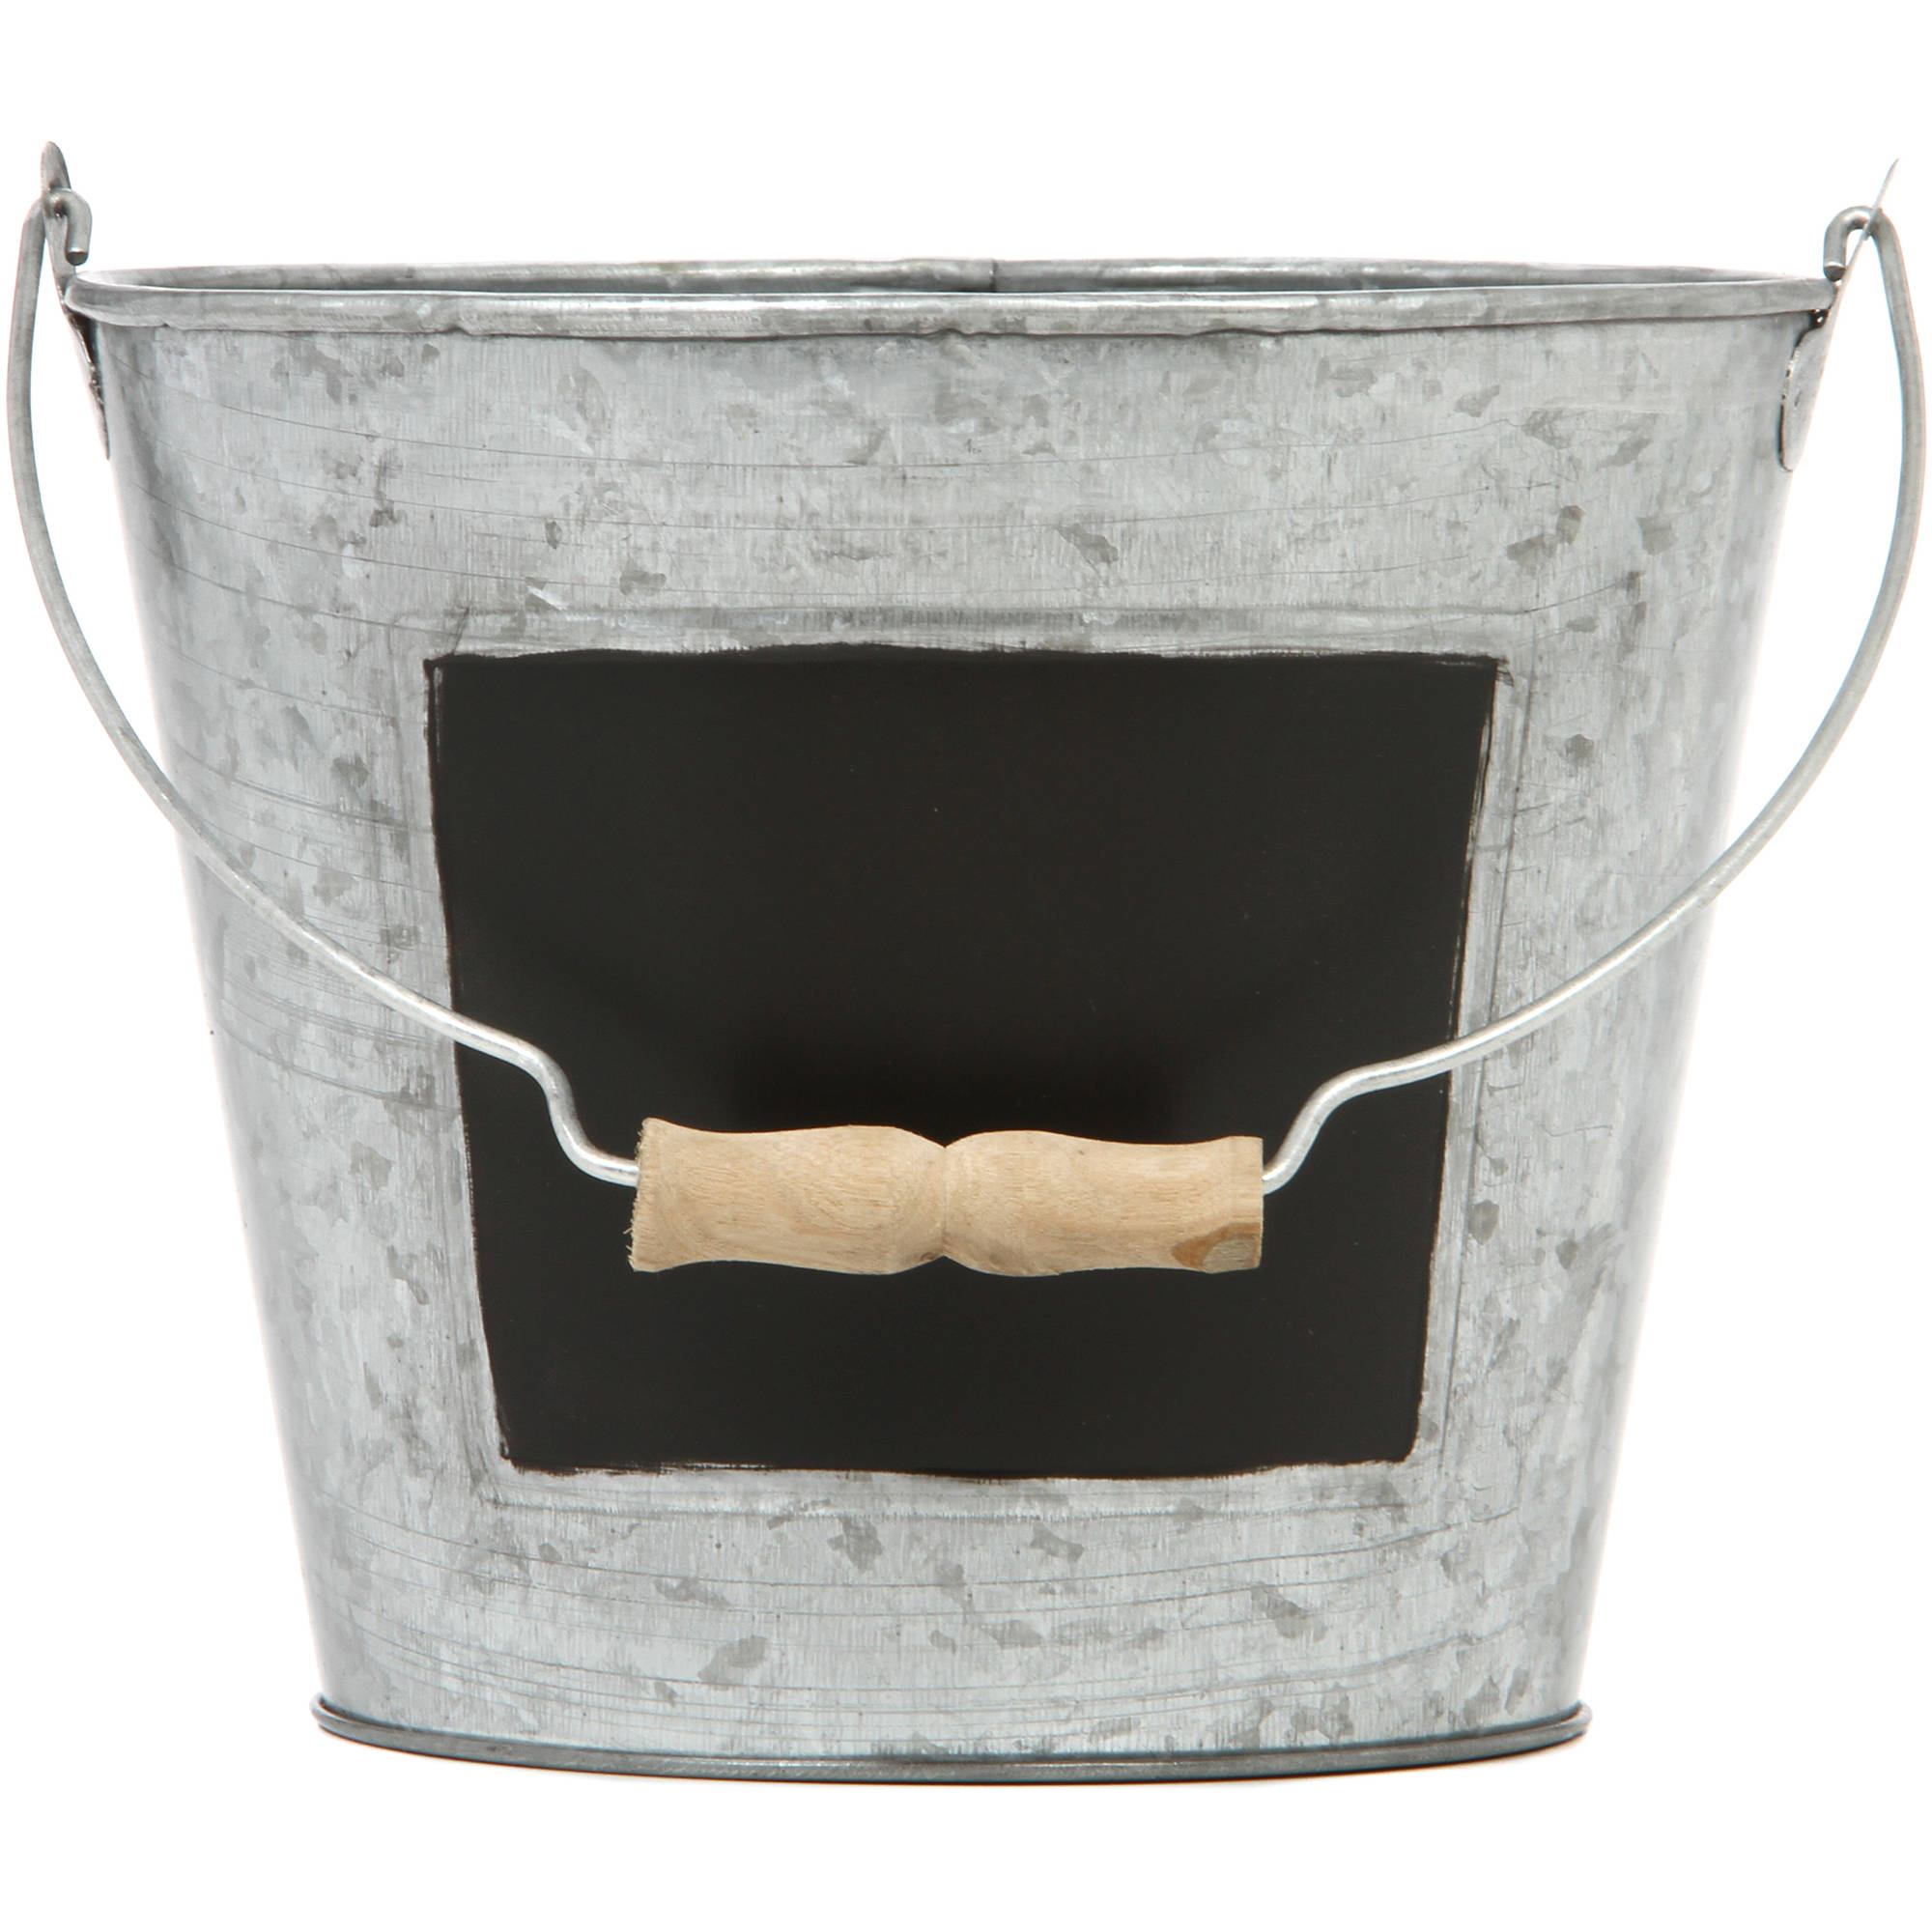 Elegant Expressions by Hosley 5.75" High Silver Galvanized Metal Pail with Chalkboard, 1 Each - image 1 of 9